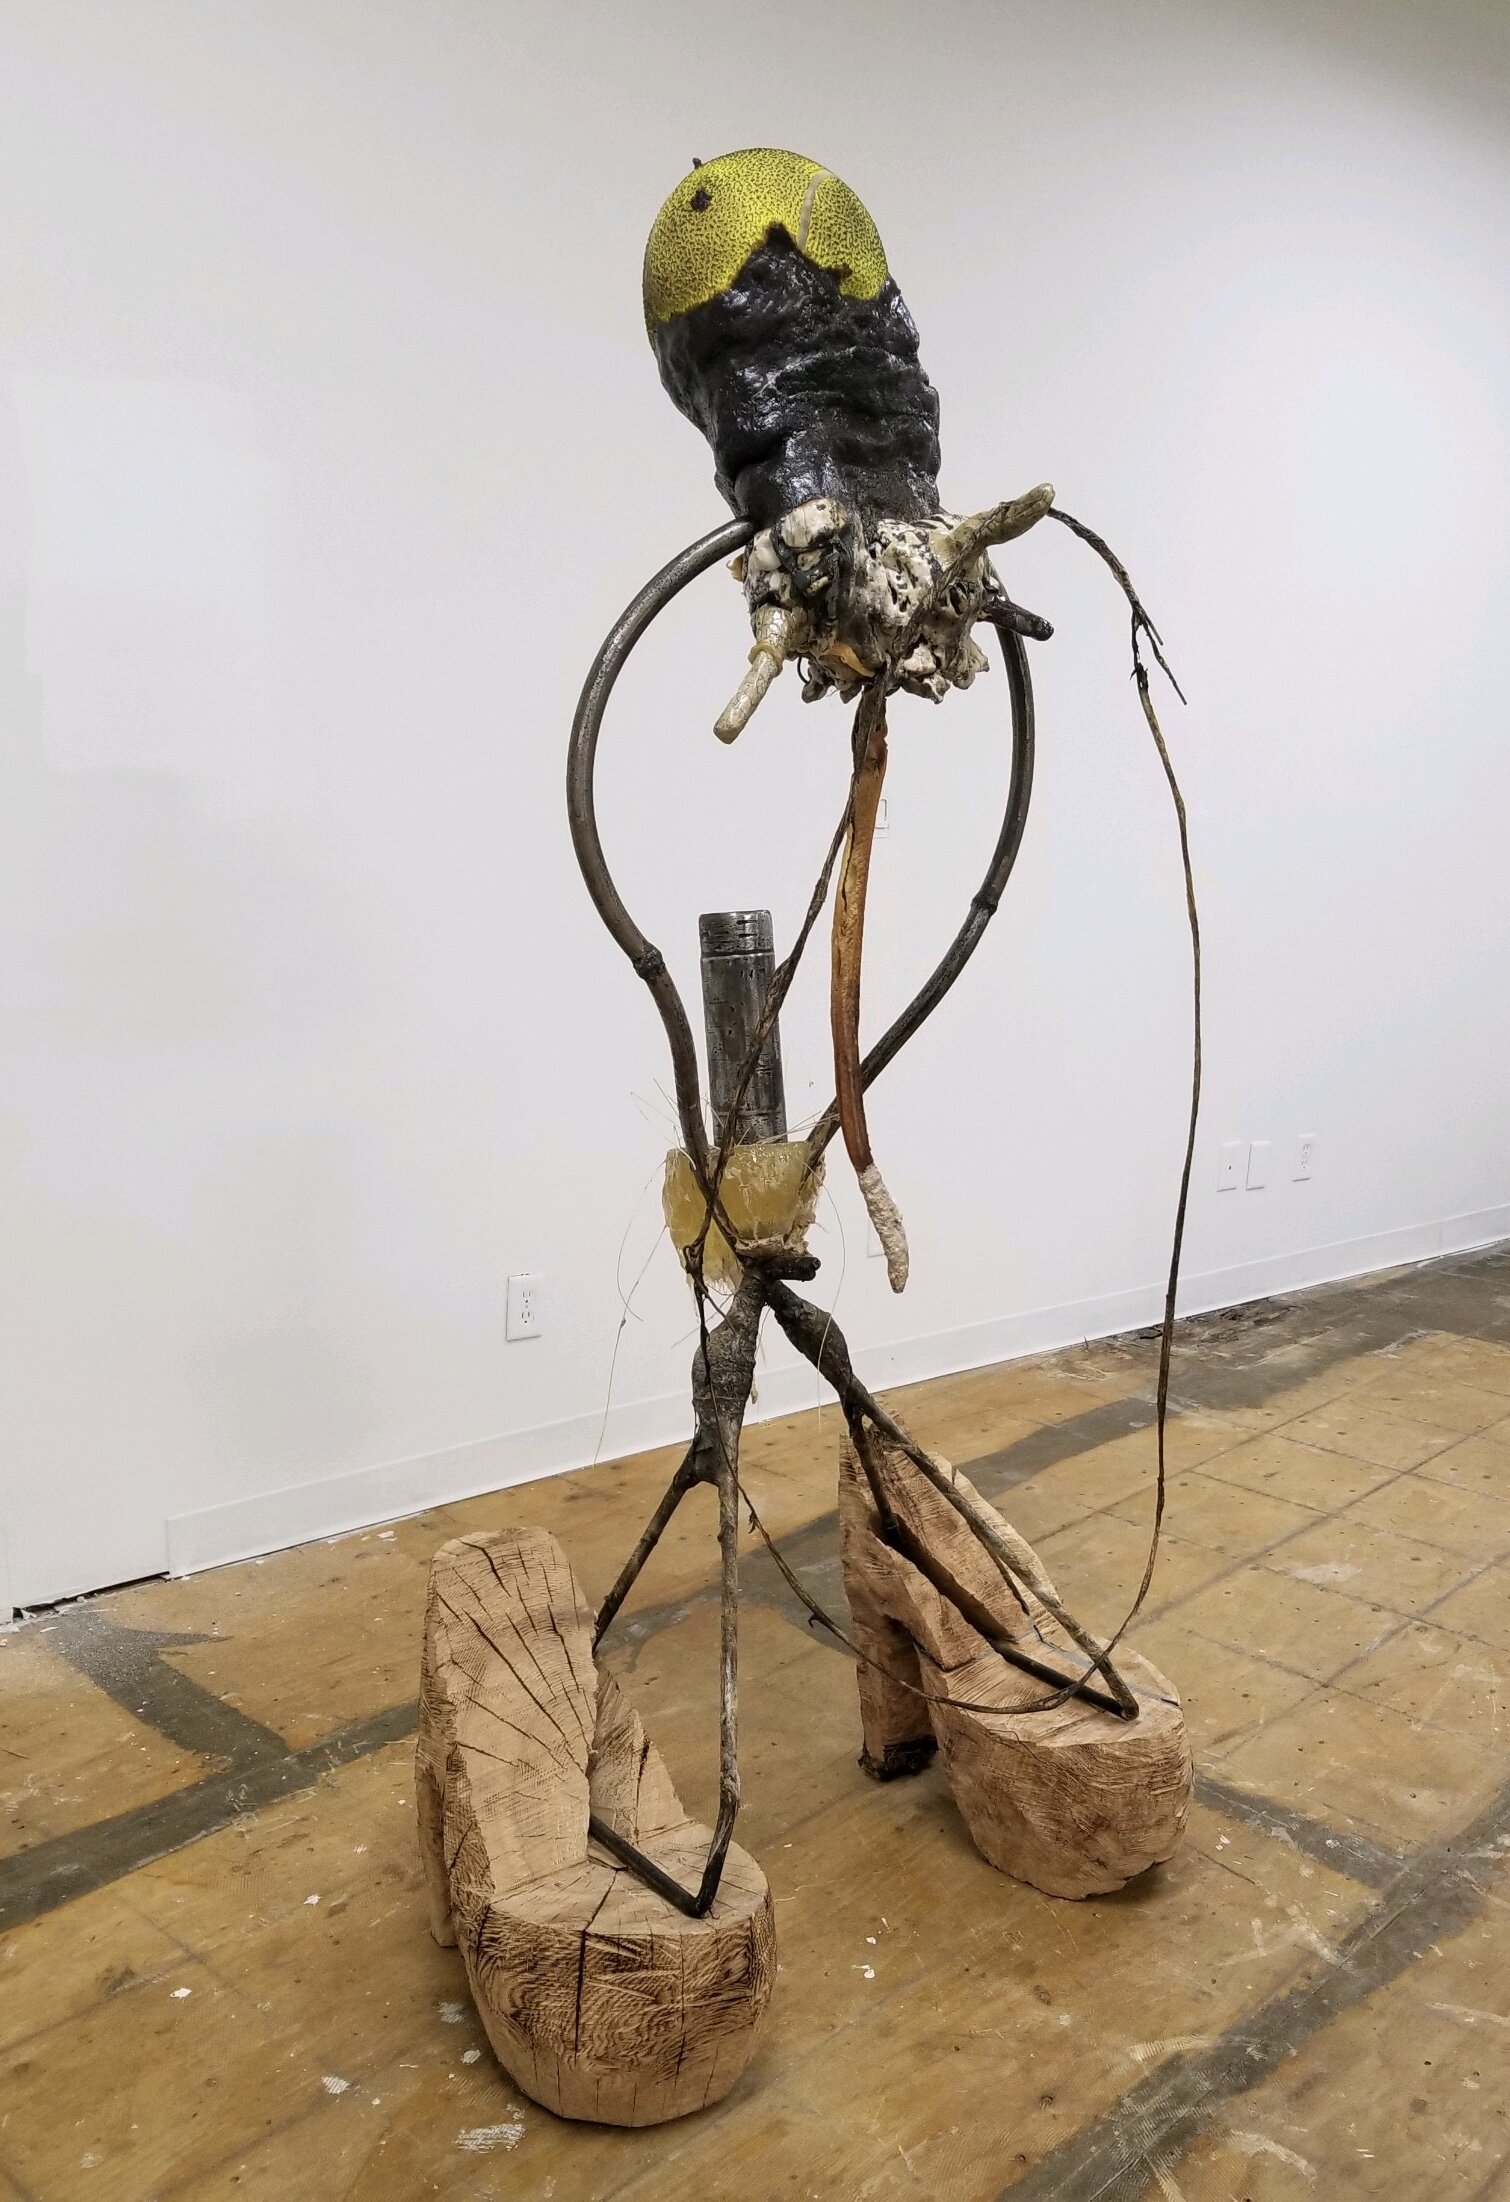 Daniel Giordano,  Study for Brother with Pet Eel and in Vicki’s Stilettos , 2016-2019, glazed ceramic, steel, wood, Amarelli liquorice, urinal cake, oversized tennis ball, eel, deep-fried batter, wire hanger, plastic wrap, tennis racket string, Plasticine clay, duct tape, epoxy, Tiger Balm, artificial teeth, 75 x 37 x 29 in.